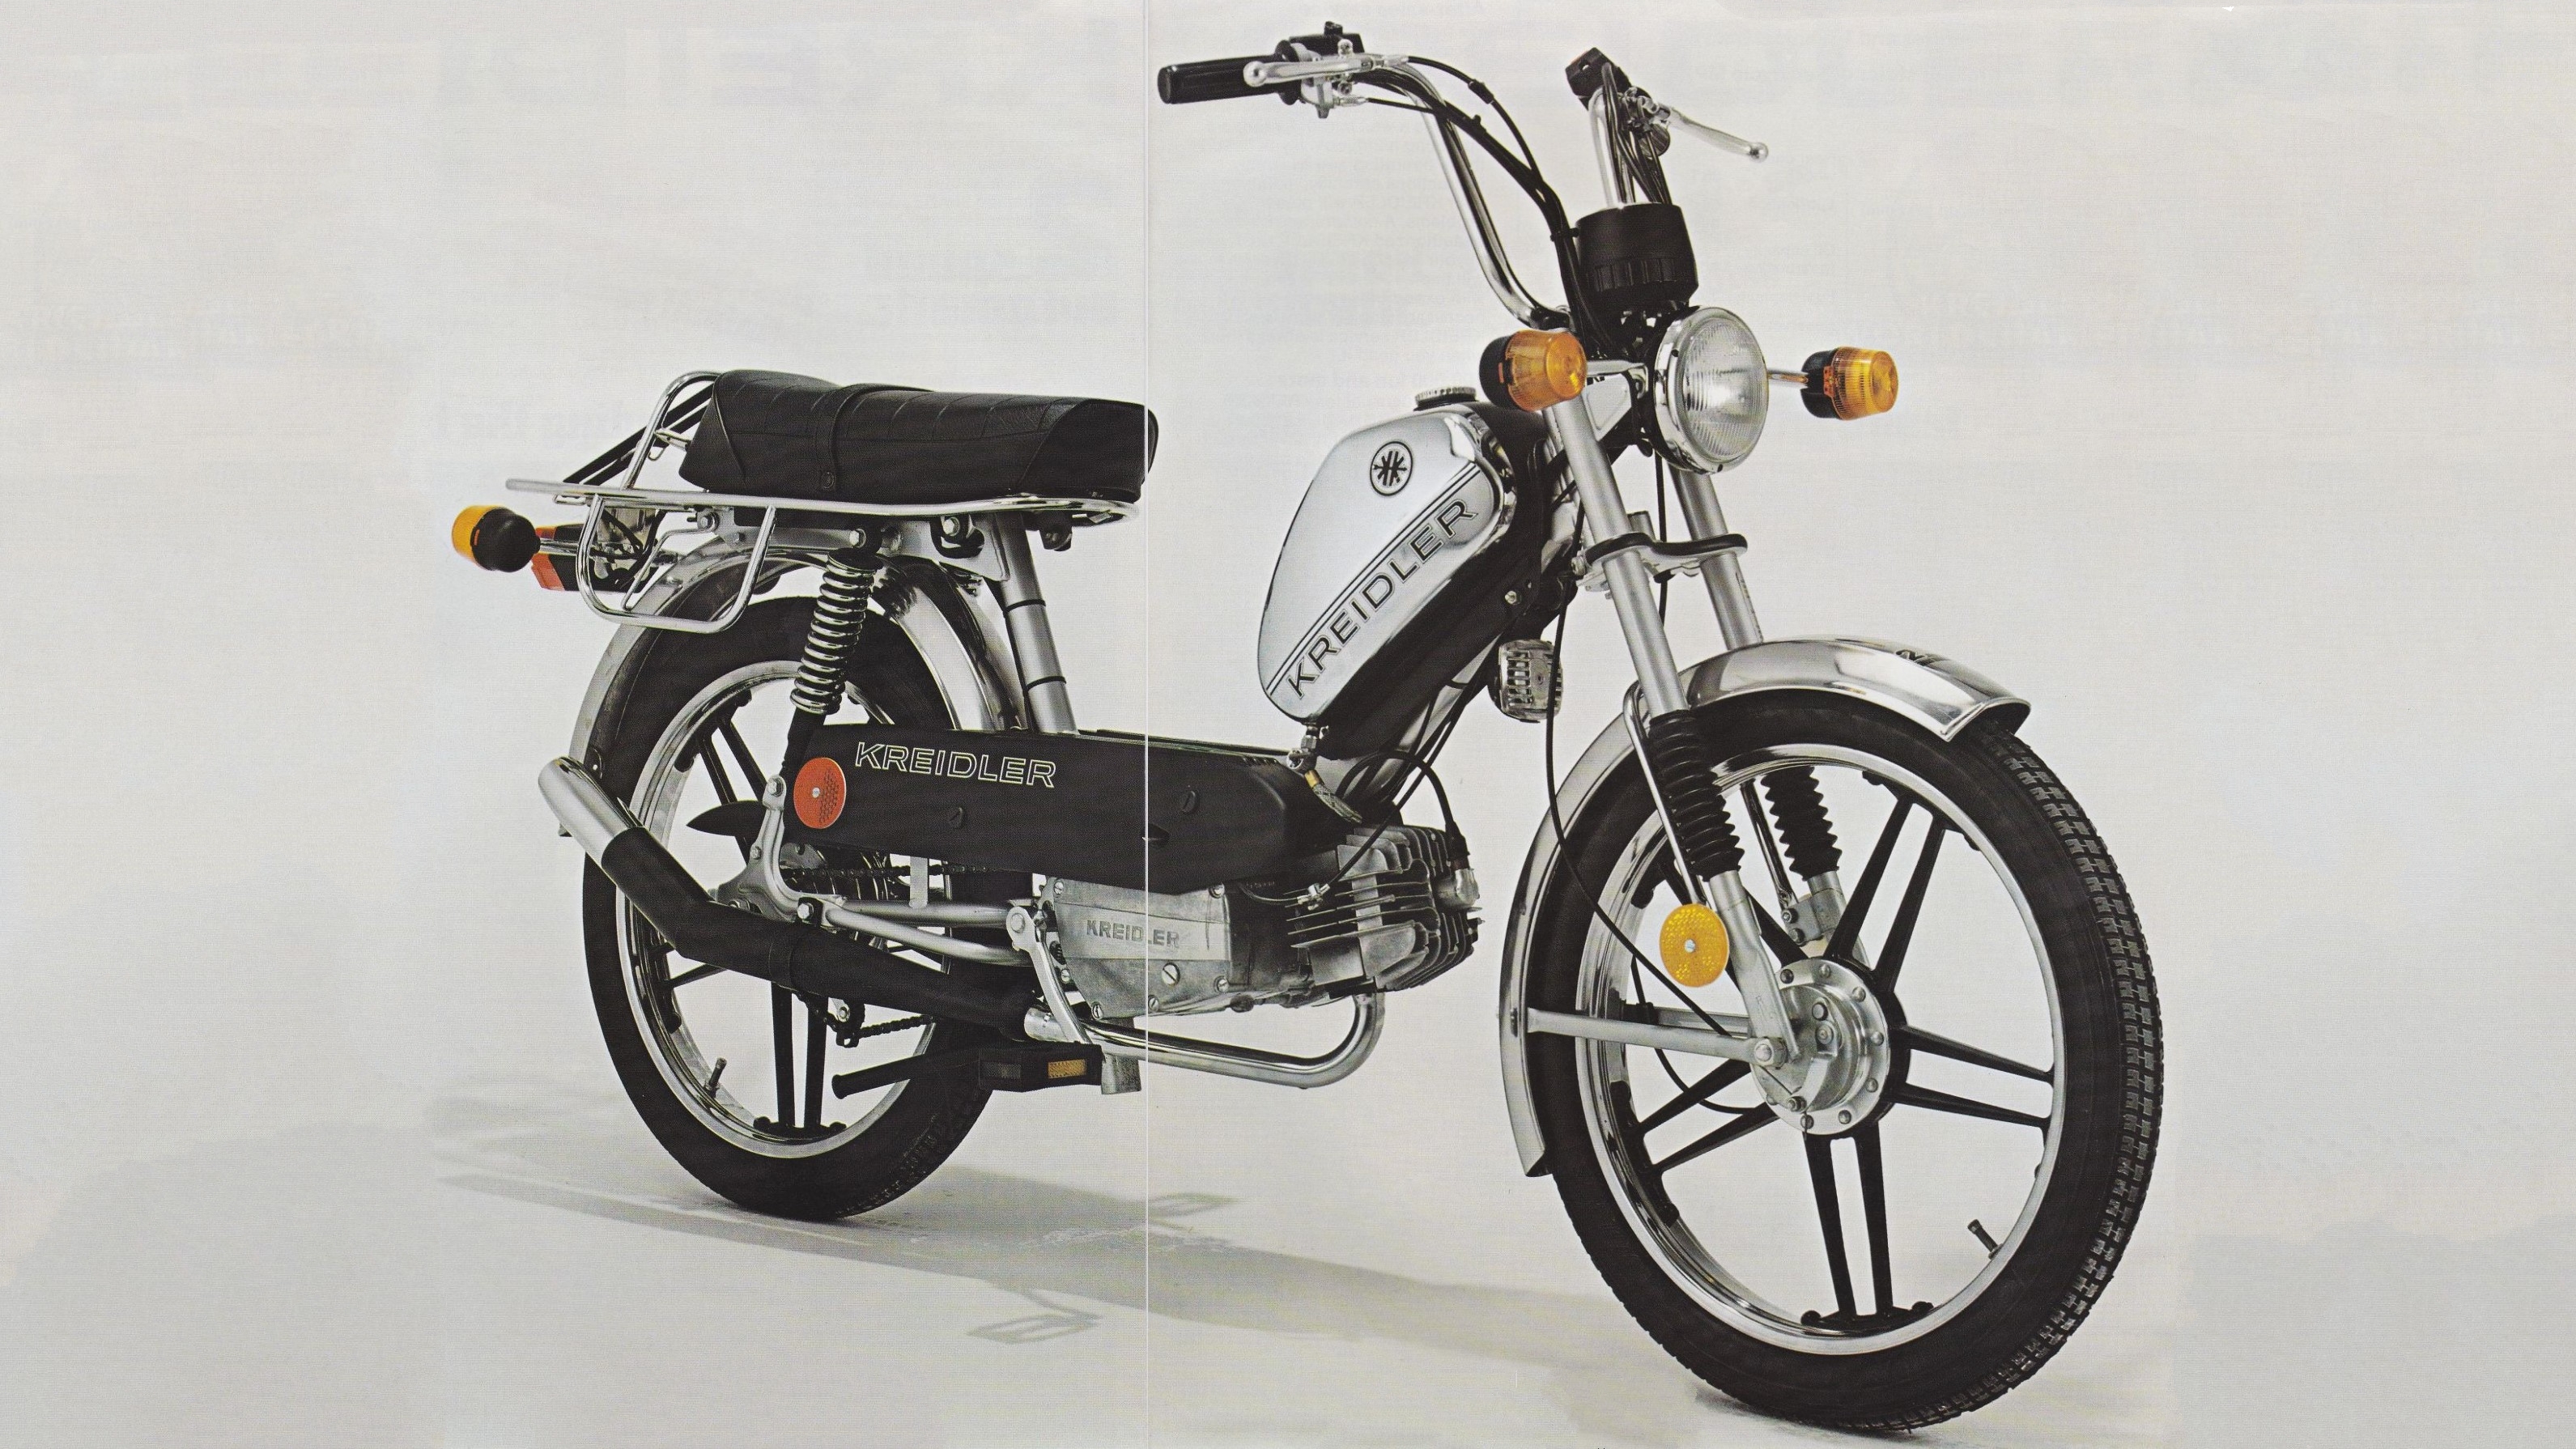 Moped MP 19 MP 19